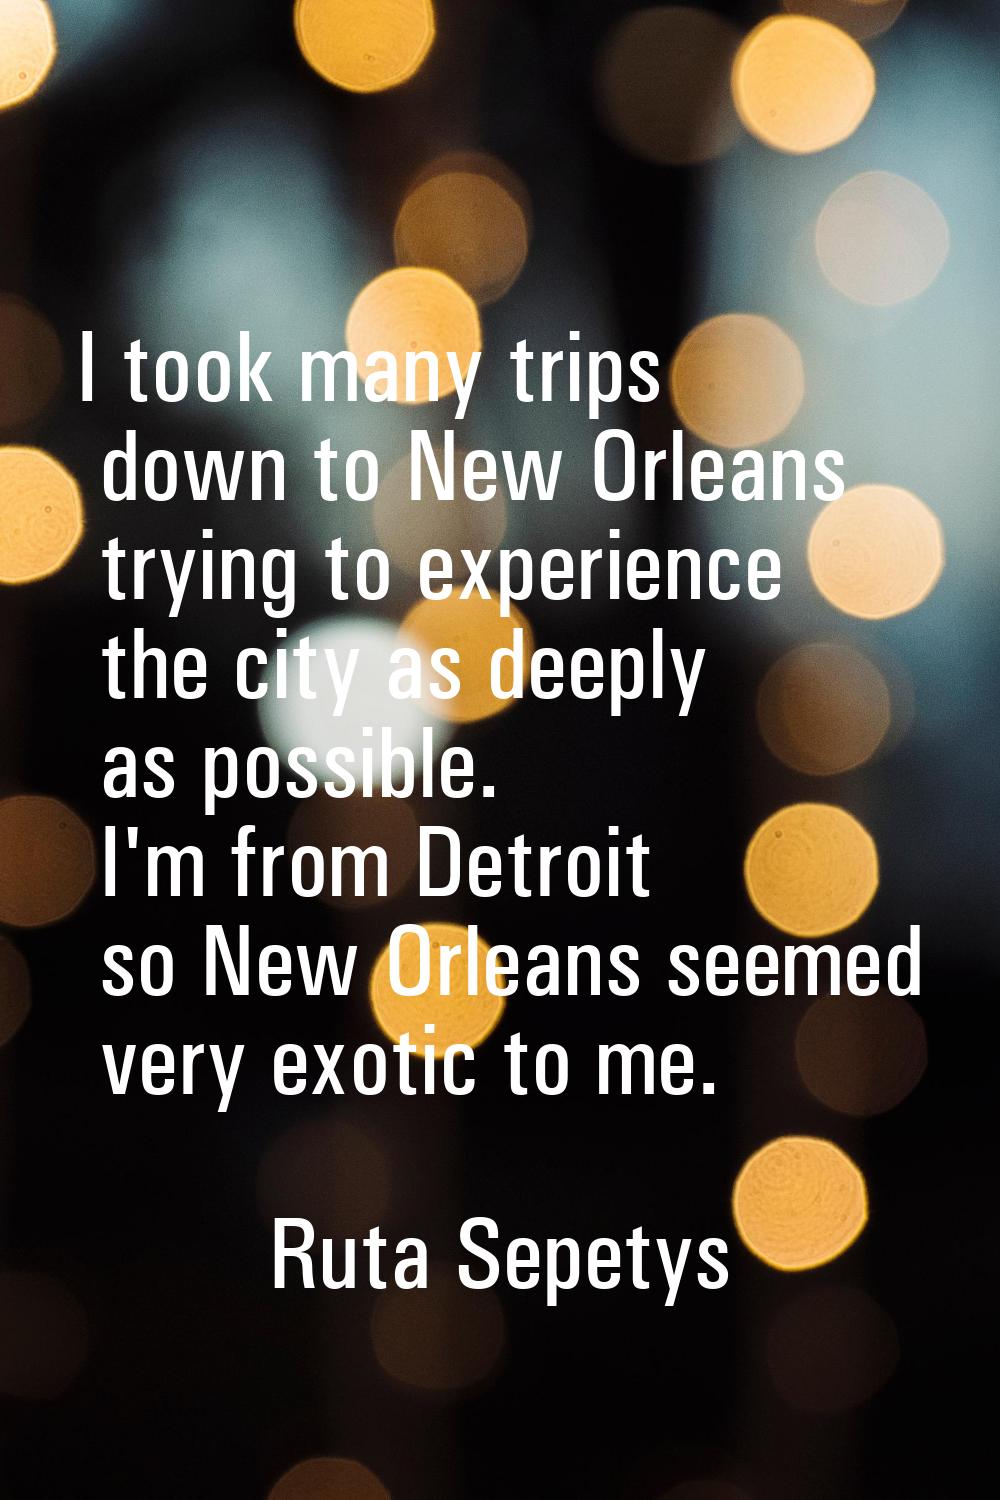 I took many trips down to New Orleans trying to experience the city as deeply as possible. I'm from